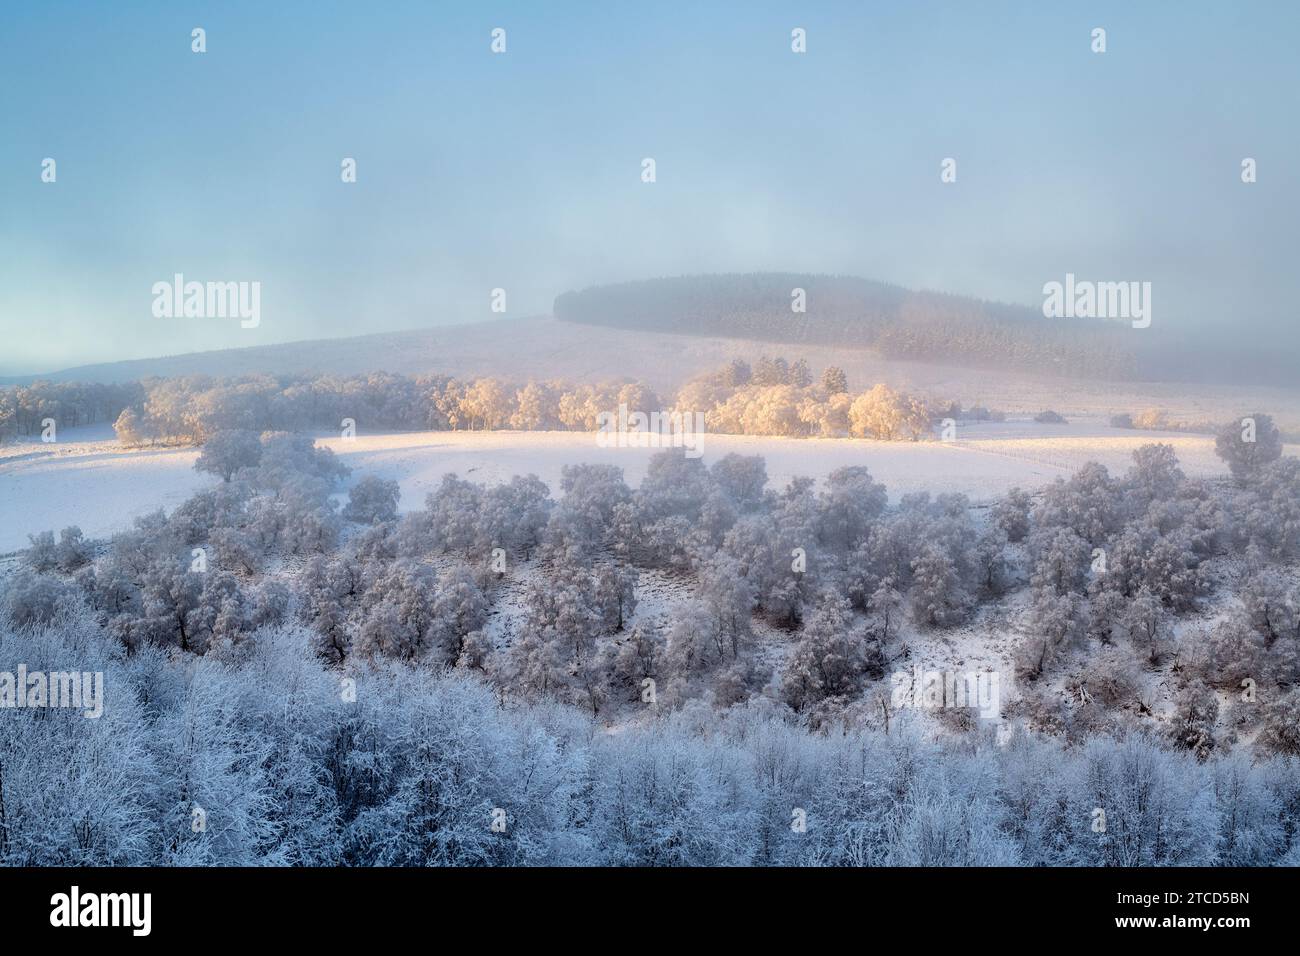 Clearing december fog over a snowy hillside just after sunrise. Morayshire, Scotland Stock Photo